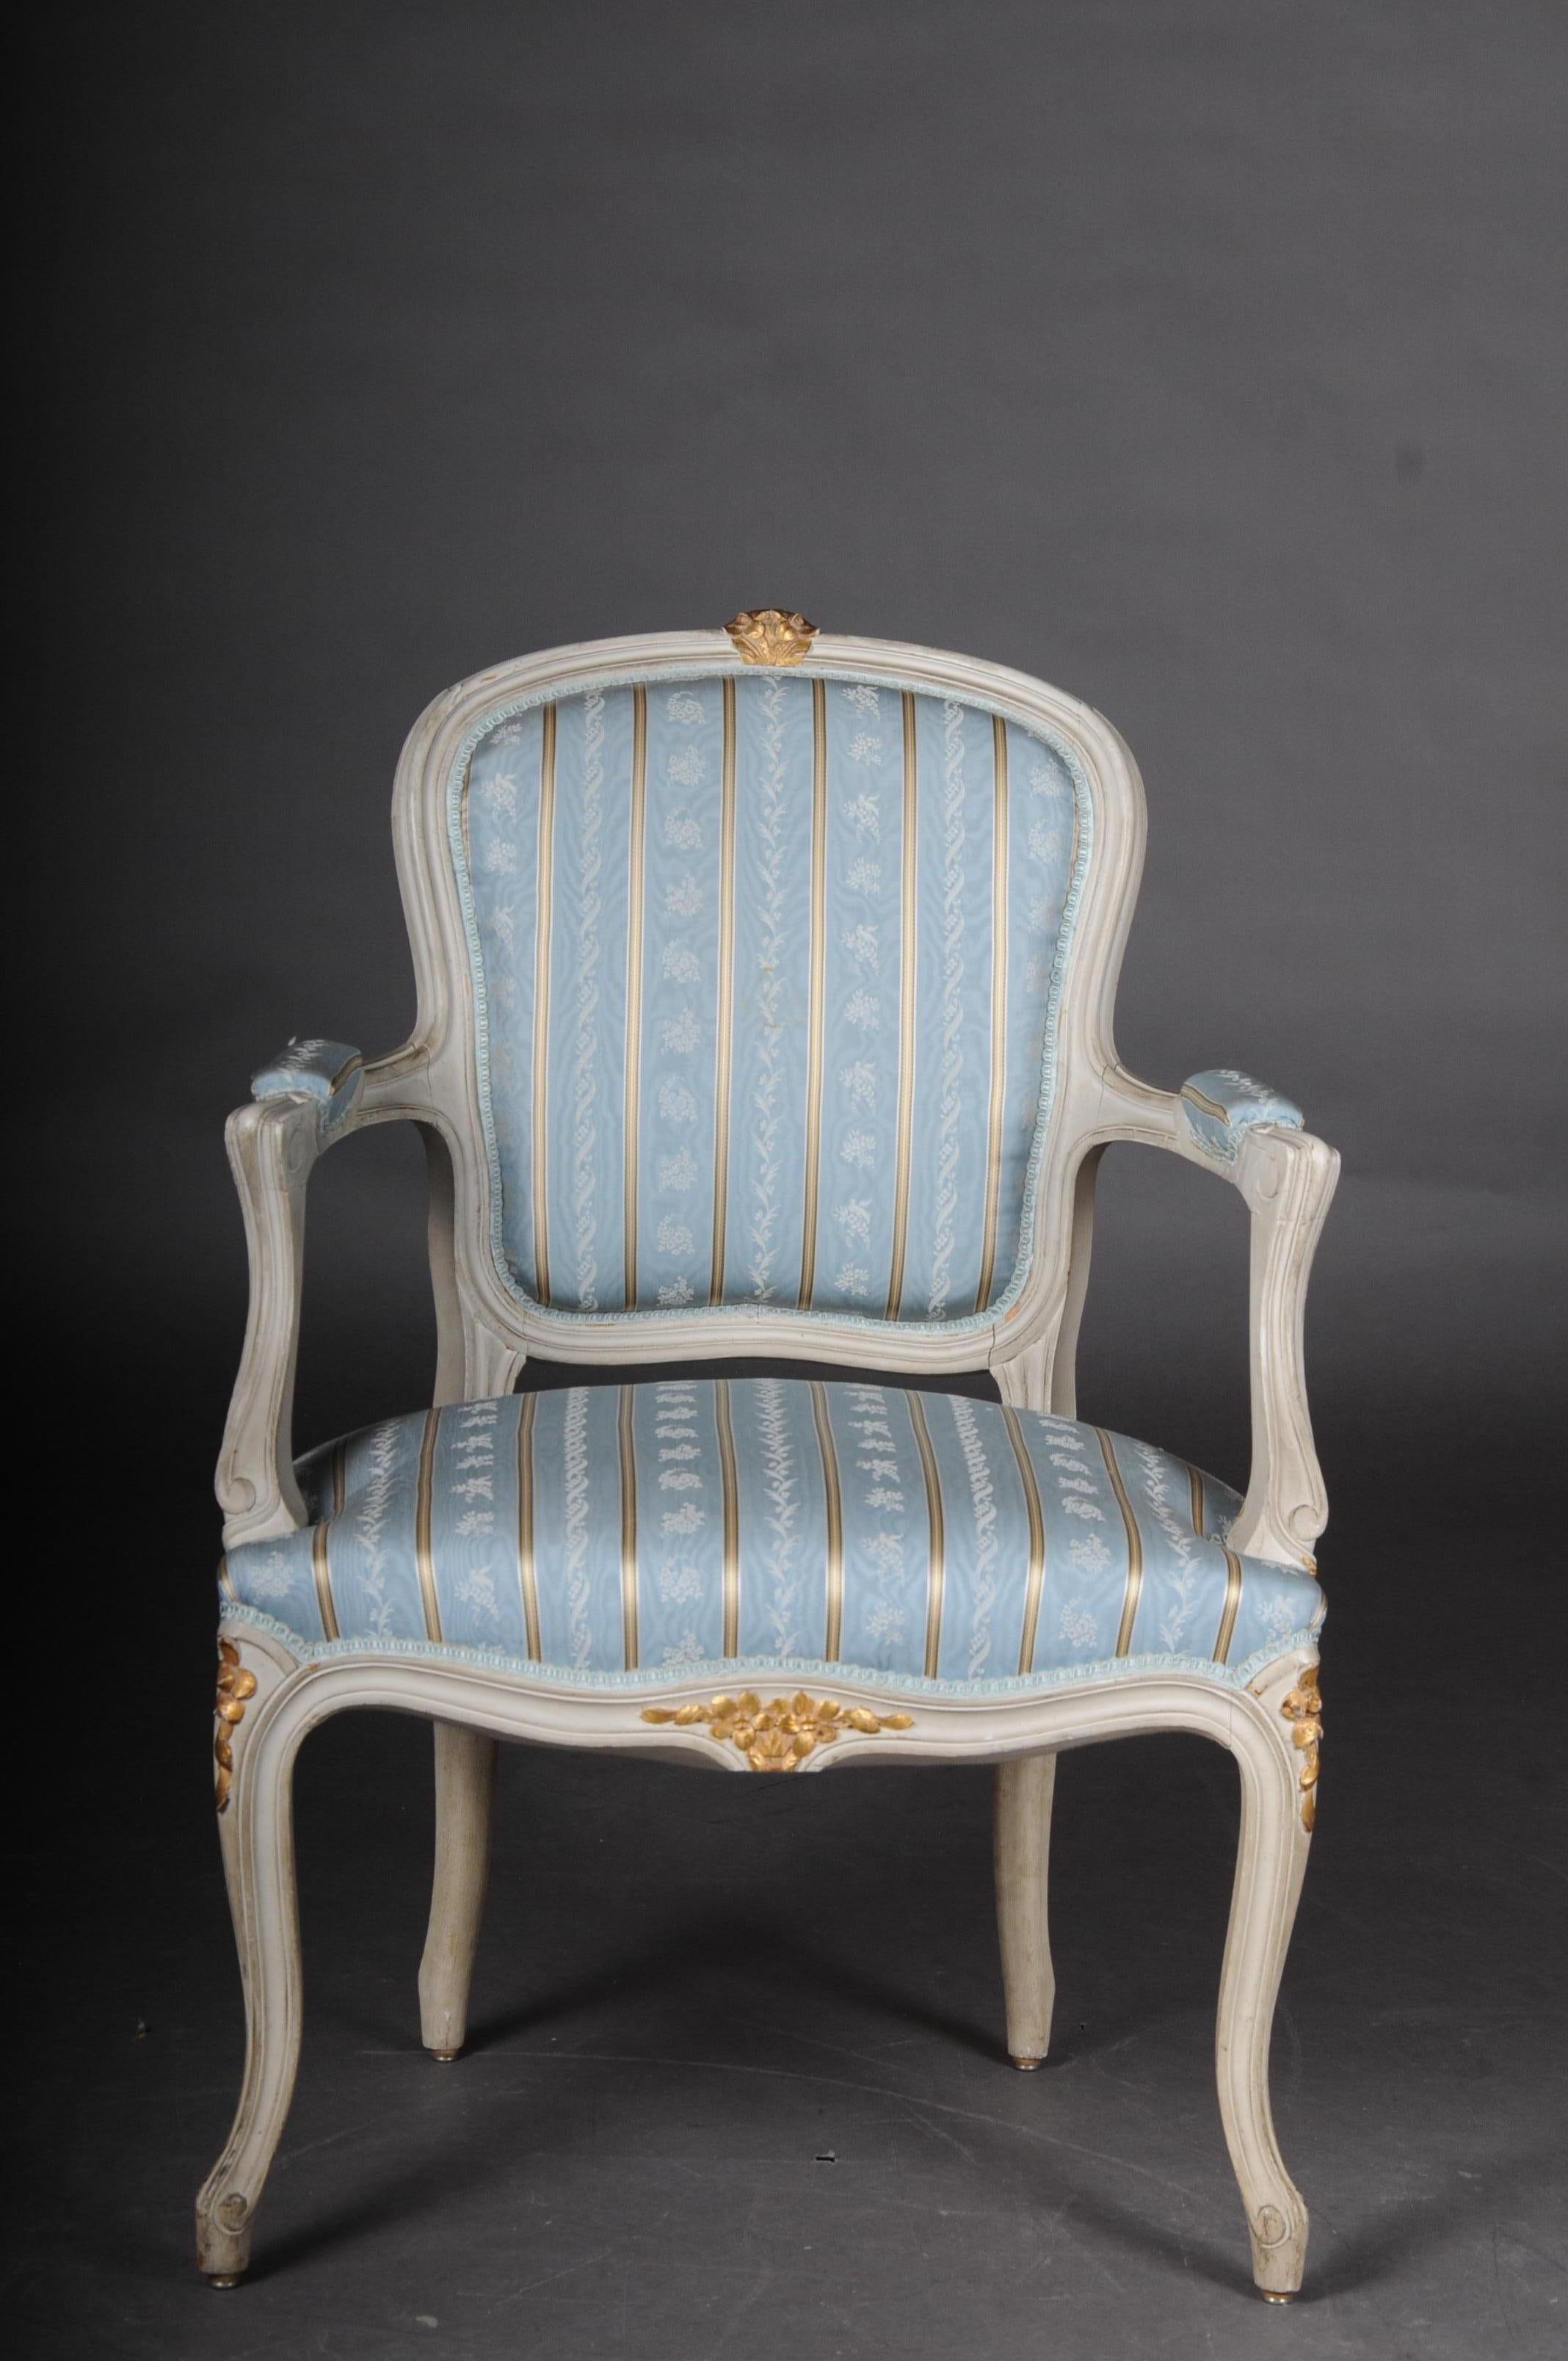 Pair of French armchairs Louis XV chairs, 20th century.

Massive beech 20th century colored and gilded. Very finely designed frame with relief carvings. Fine and very time-typical lines, a seating of the highest quality. Carved solid wood. Rich